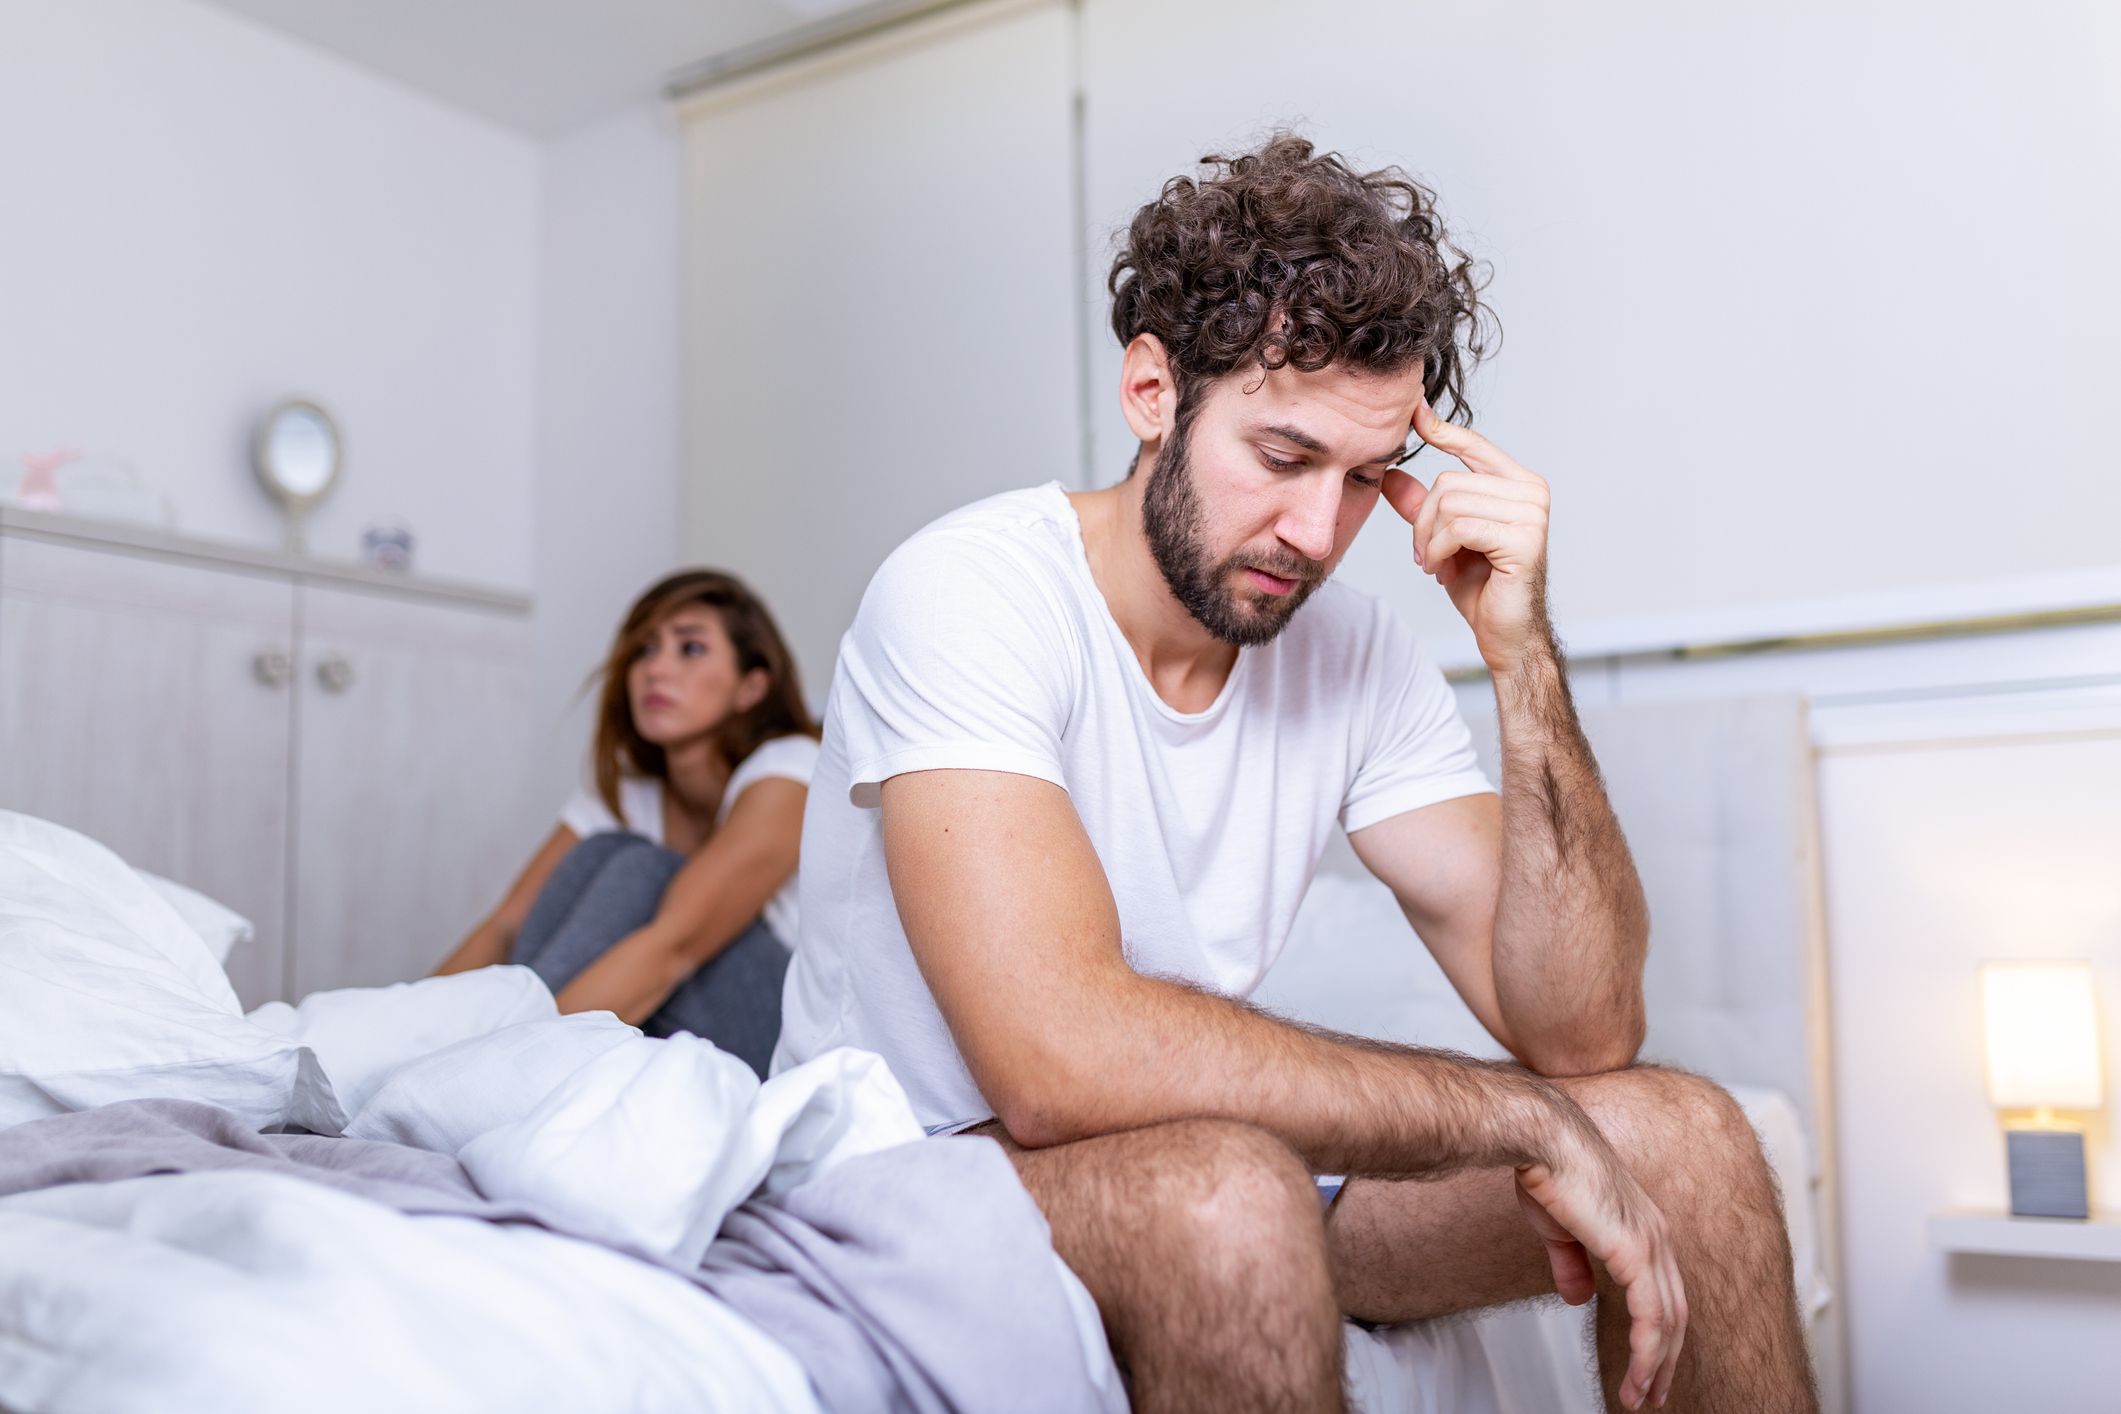 Does COVID-19 Cause Erectile Dysfunction? Doctors Explain the Link